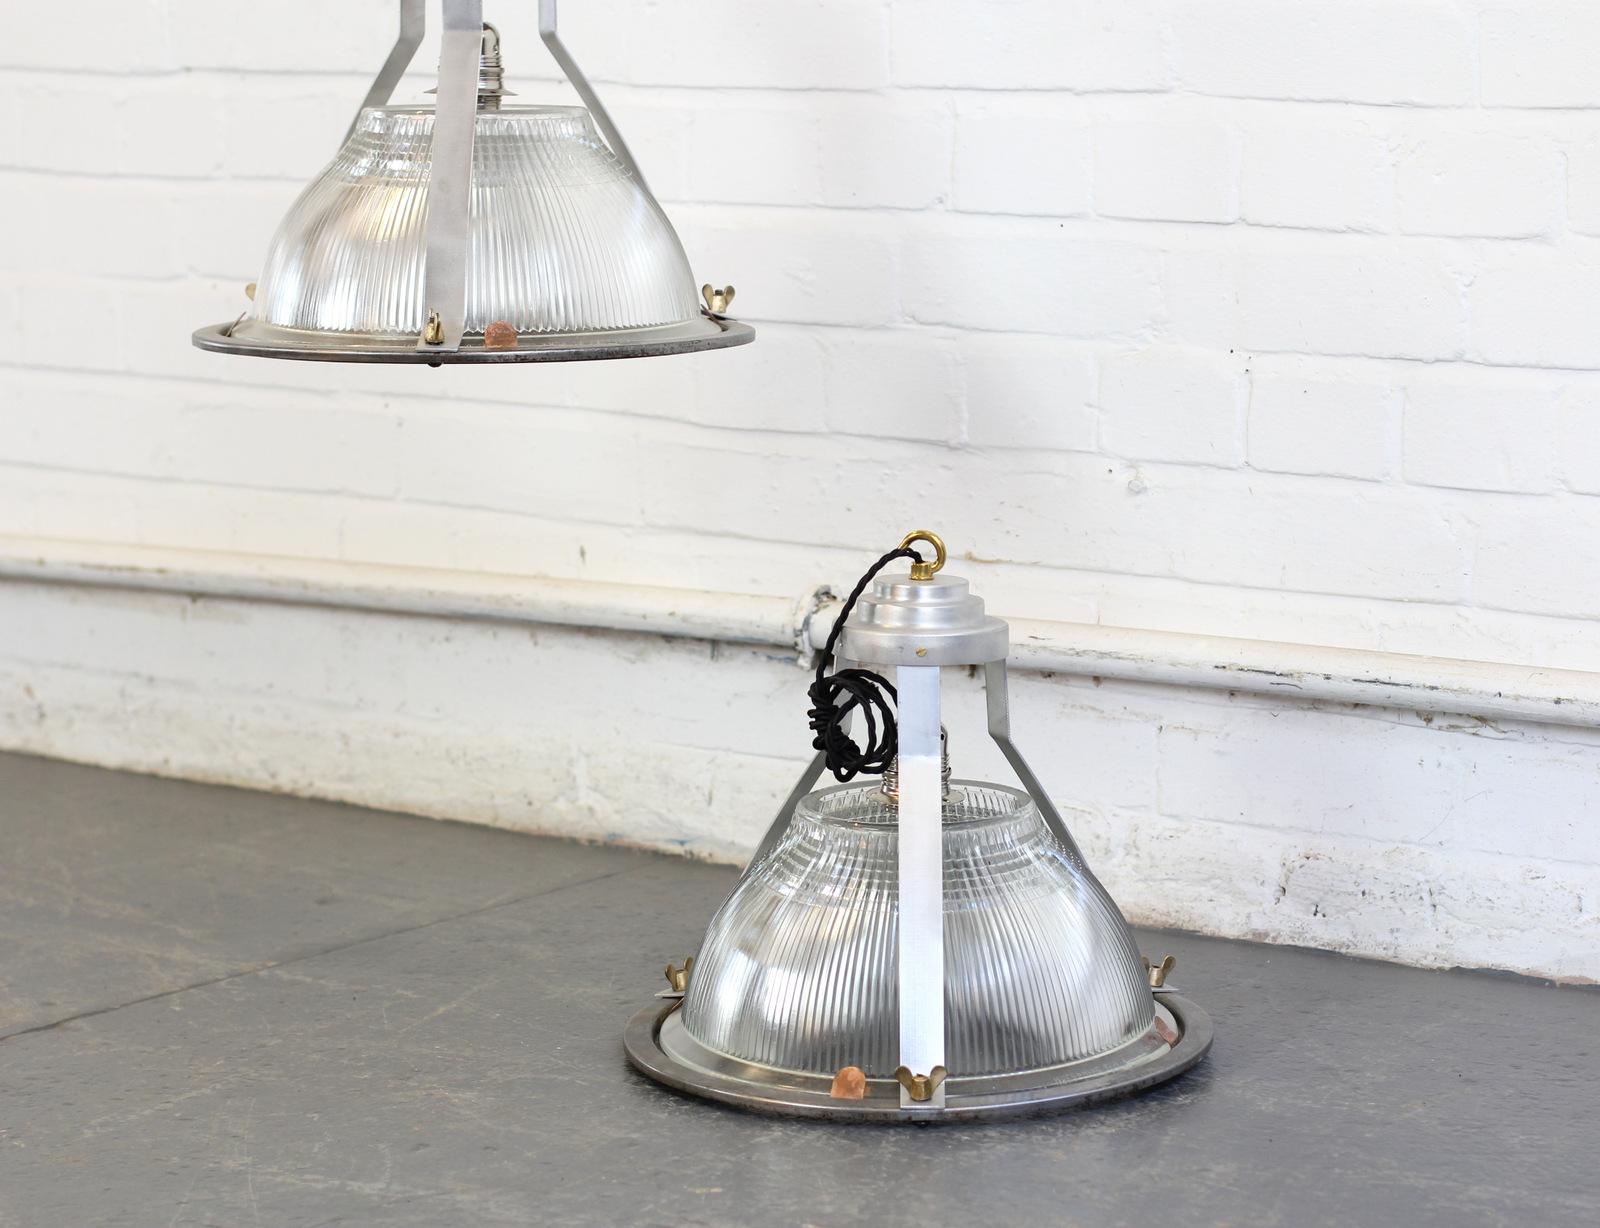 Industrial Holophane lights, circa 1950s

- Price is per light
- Heavy prismatic glass 
- Stamped 